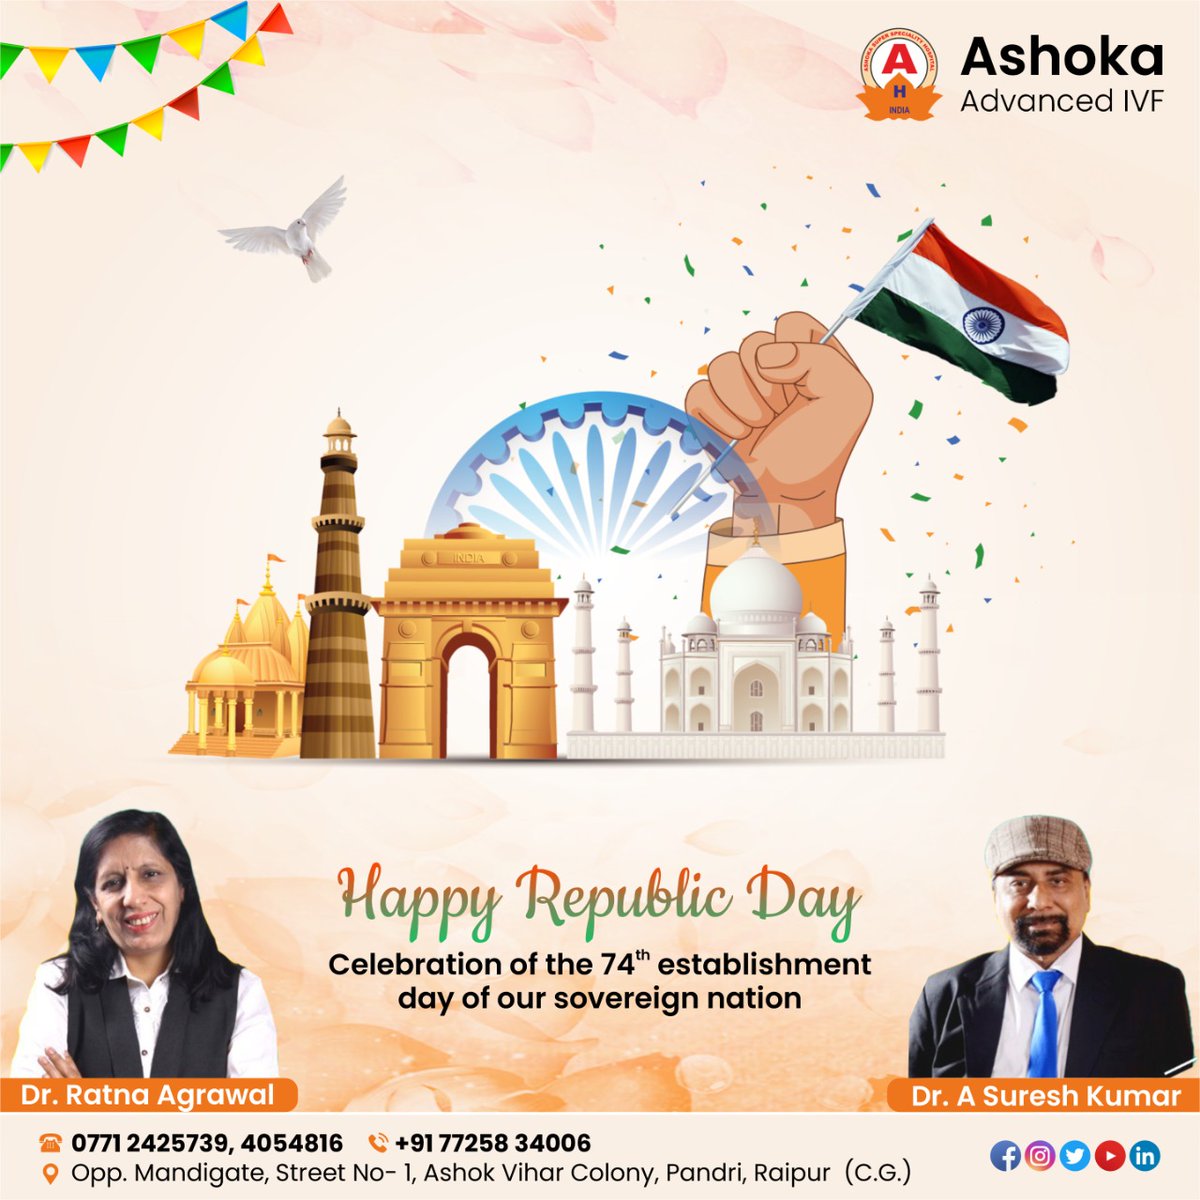 Ashoka Advanced IVF wishes you a very Happy Republic Day. May our nation grow and prosper more every year.

#HappyRepublicDay
#fertility #ivfspecialist  #india #ivf #menstruation #infertilityproblem #stayhealthy #factsaboutivf 
#ashokaadvancedivf #obstetrics #ivfsolution